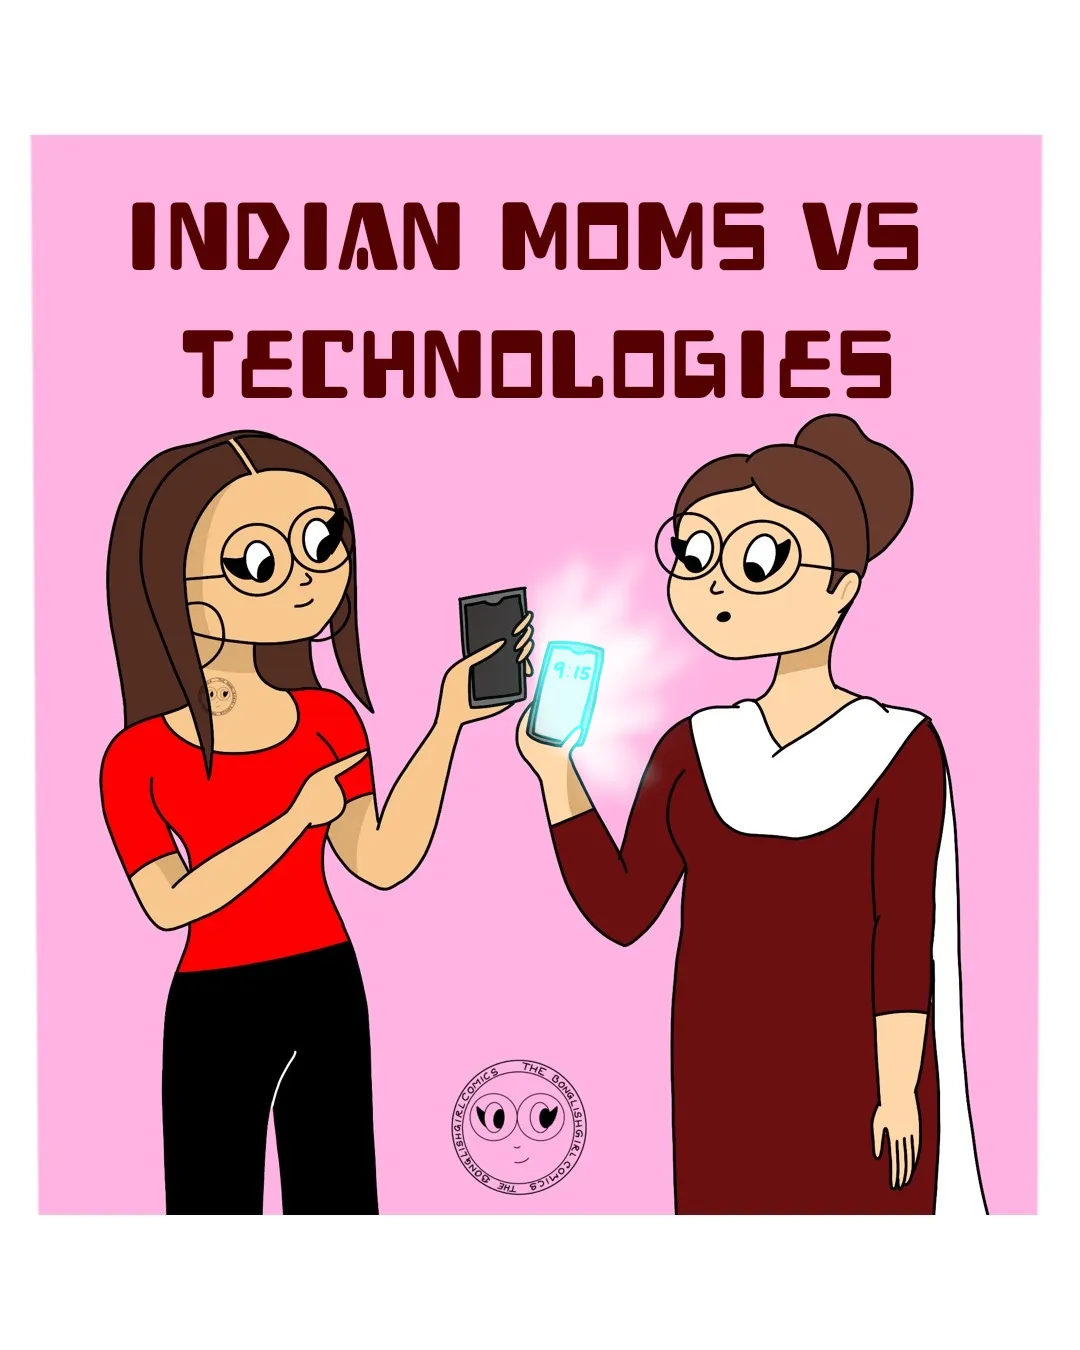 Phones and moms